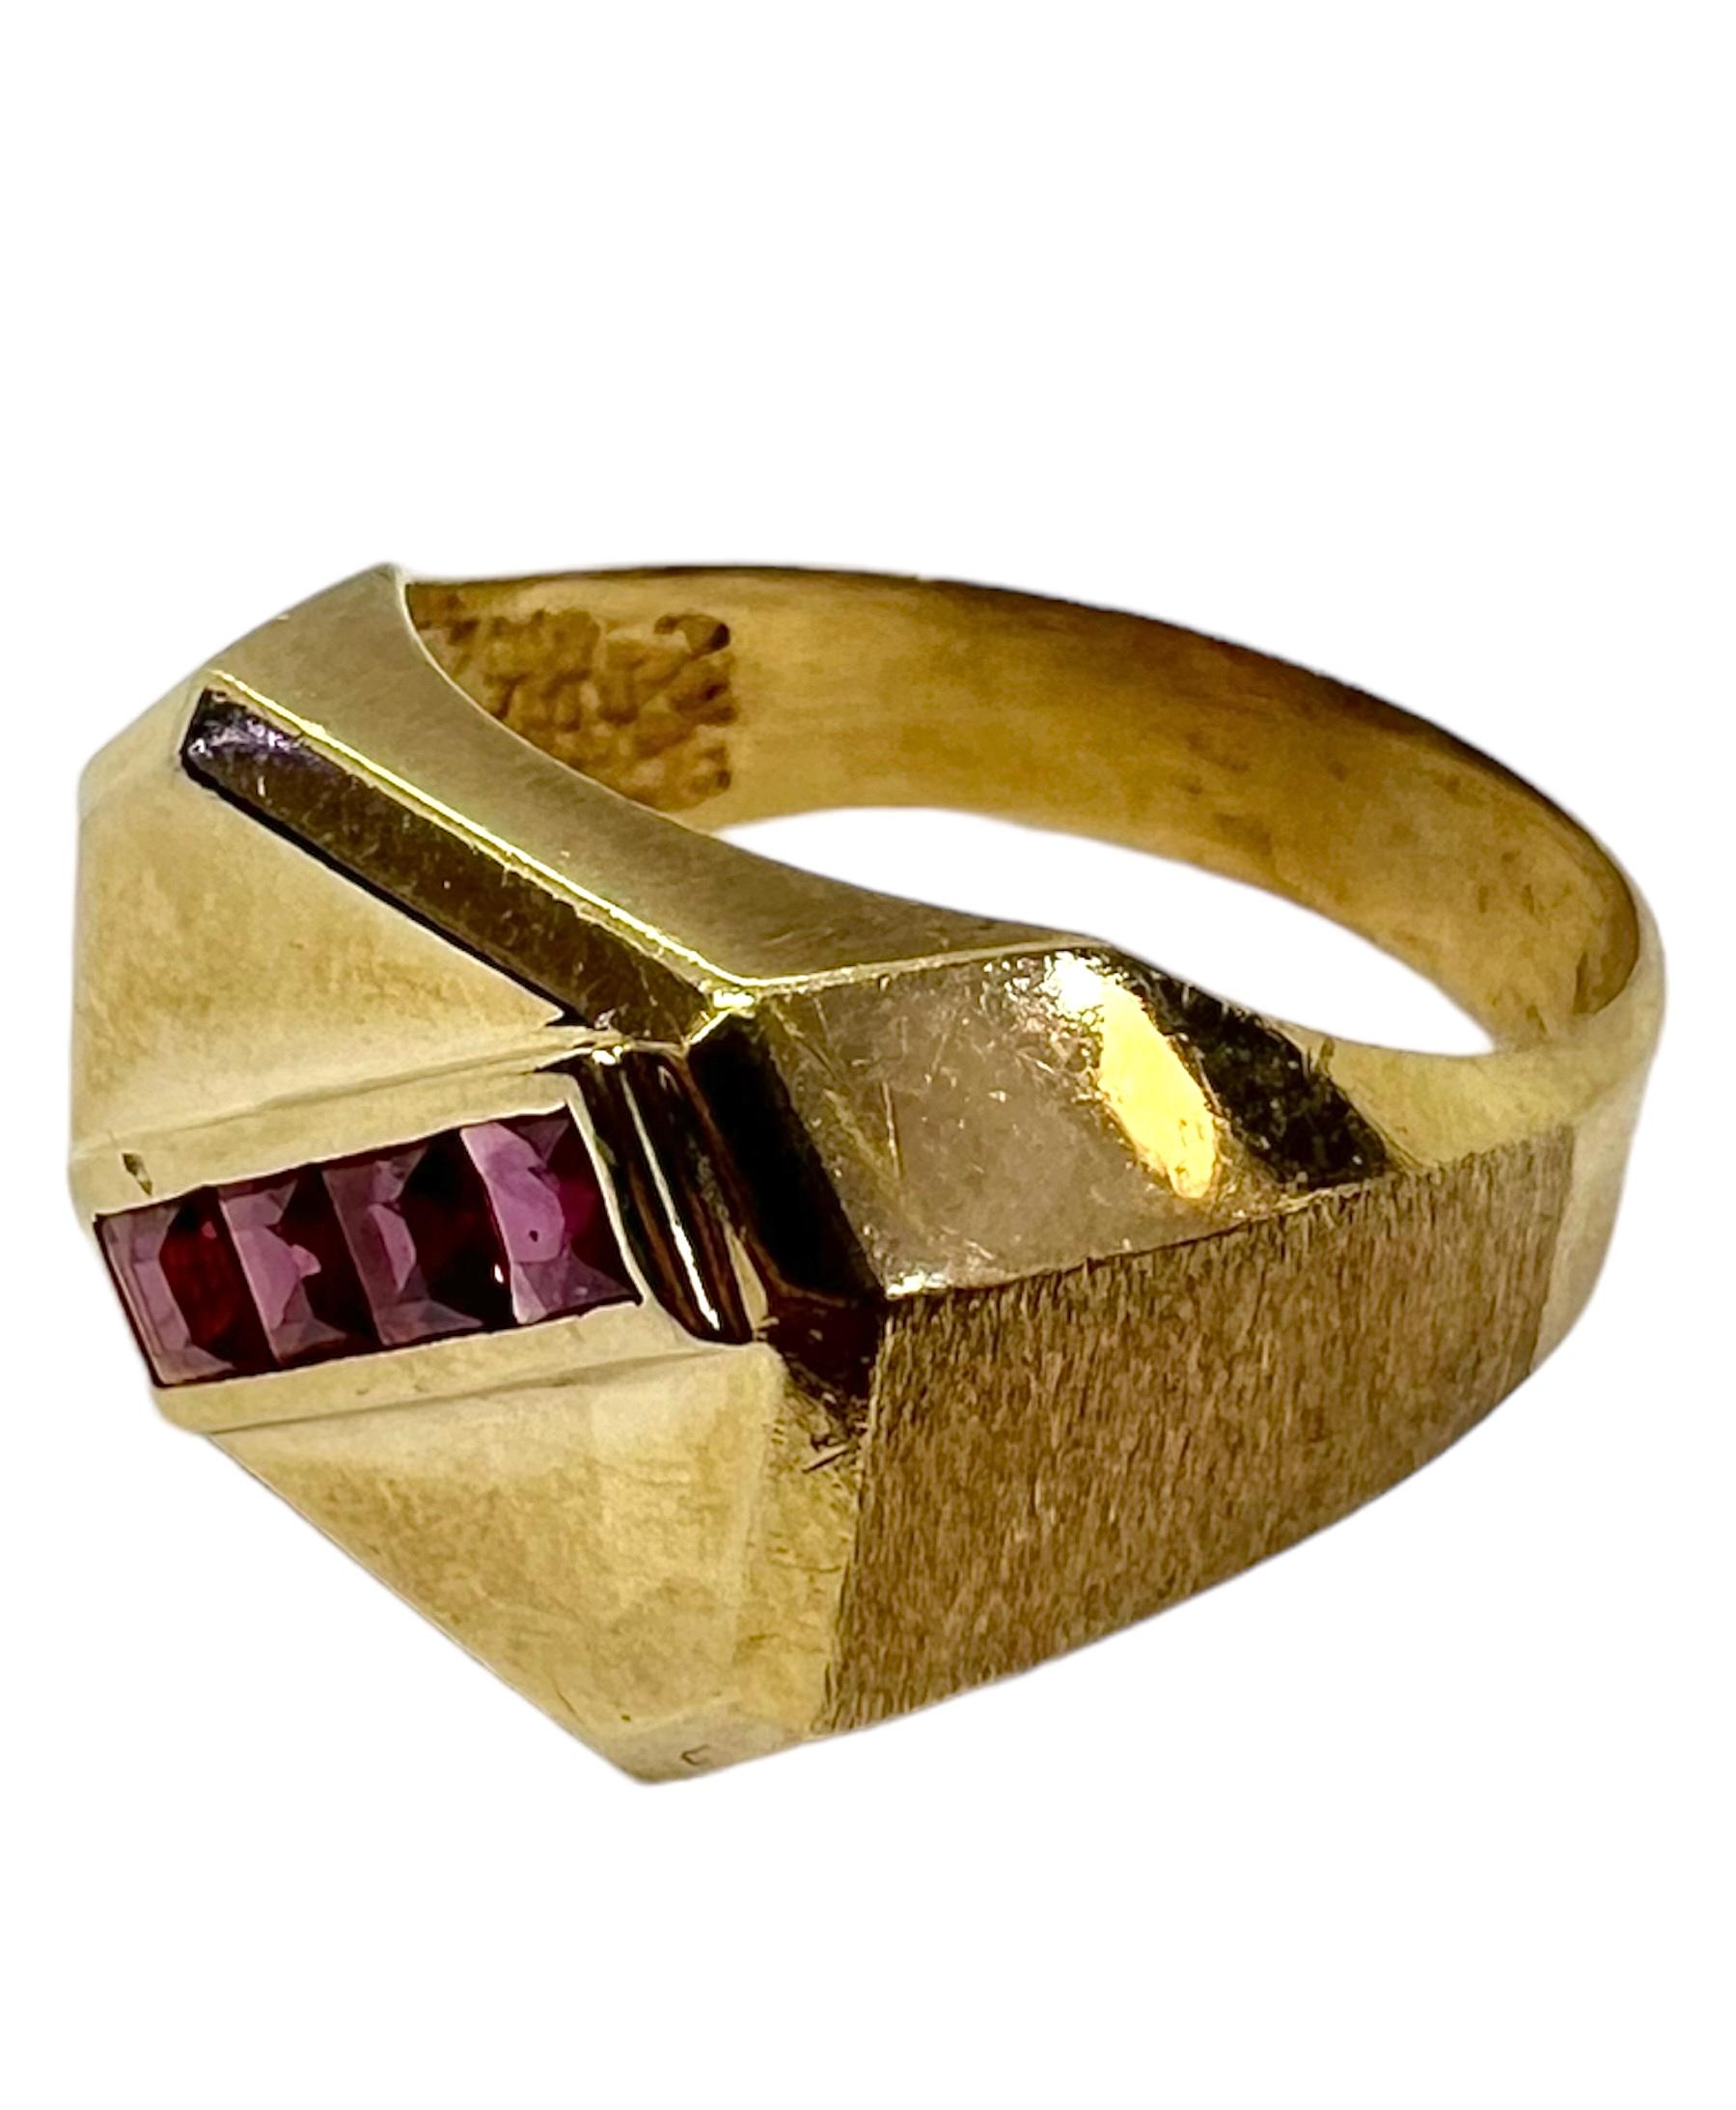 14K yellow gold ring with square cut rubies.

Sophia D by Joseph Dardashti LTD has been known worldwide for 35 years and are inspired by classic Art Deco design that merges with modern manufacturing techniques.